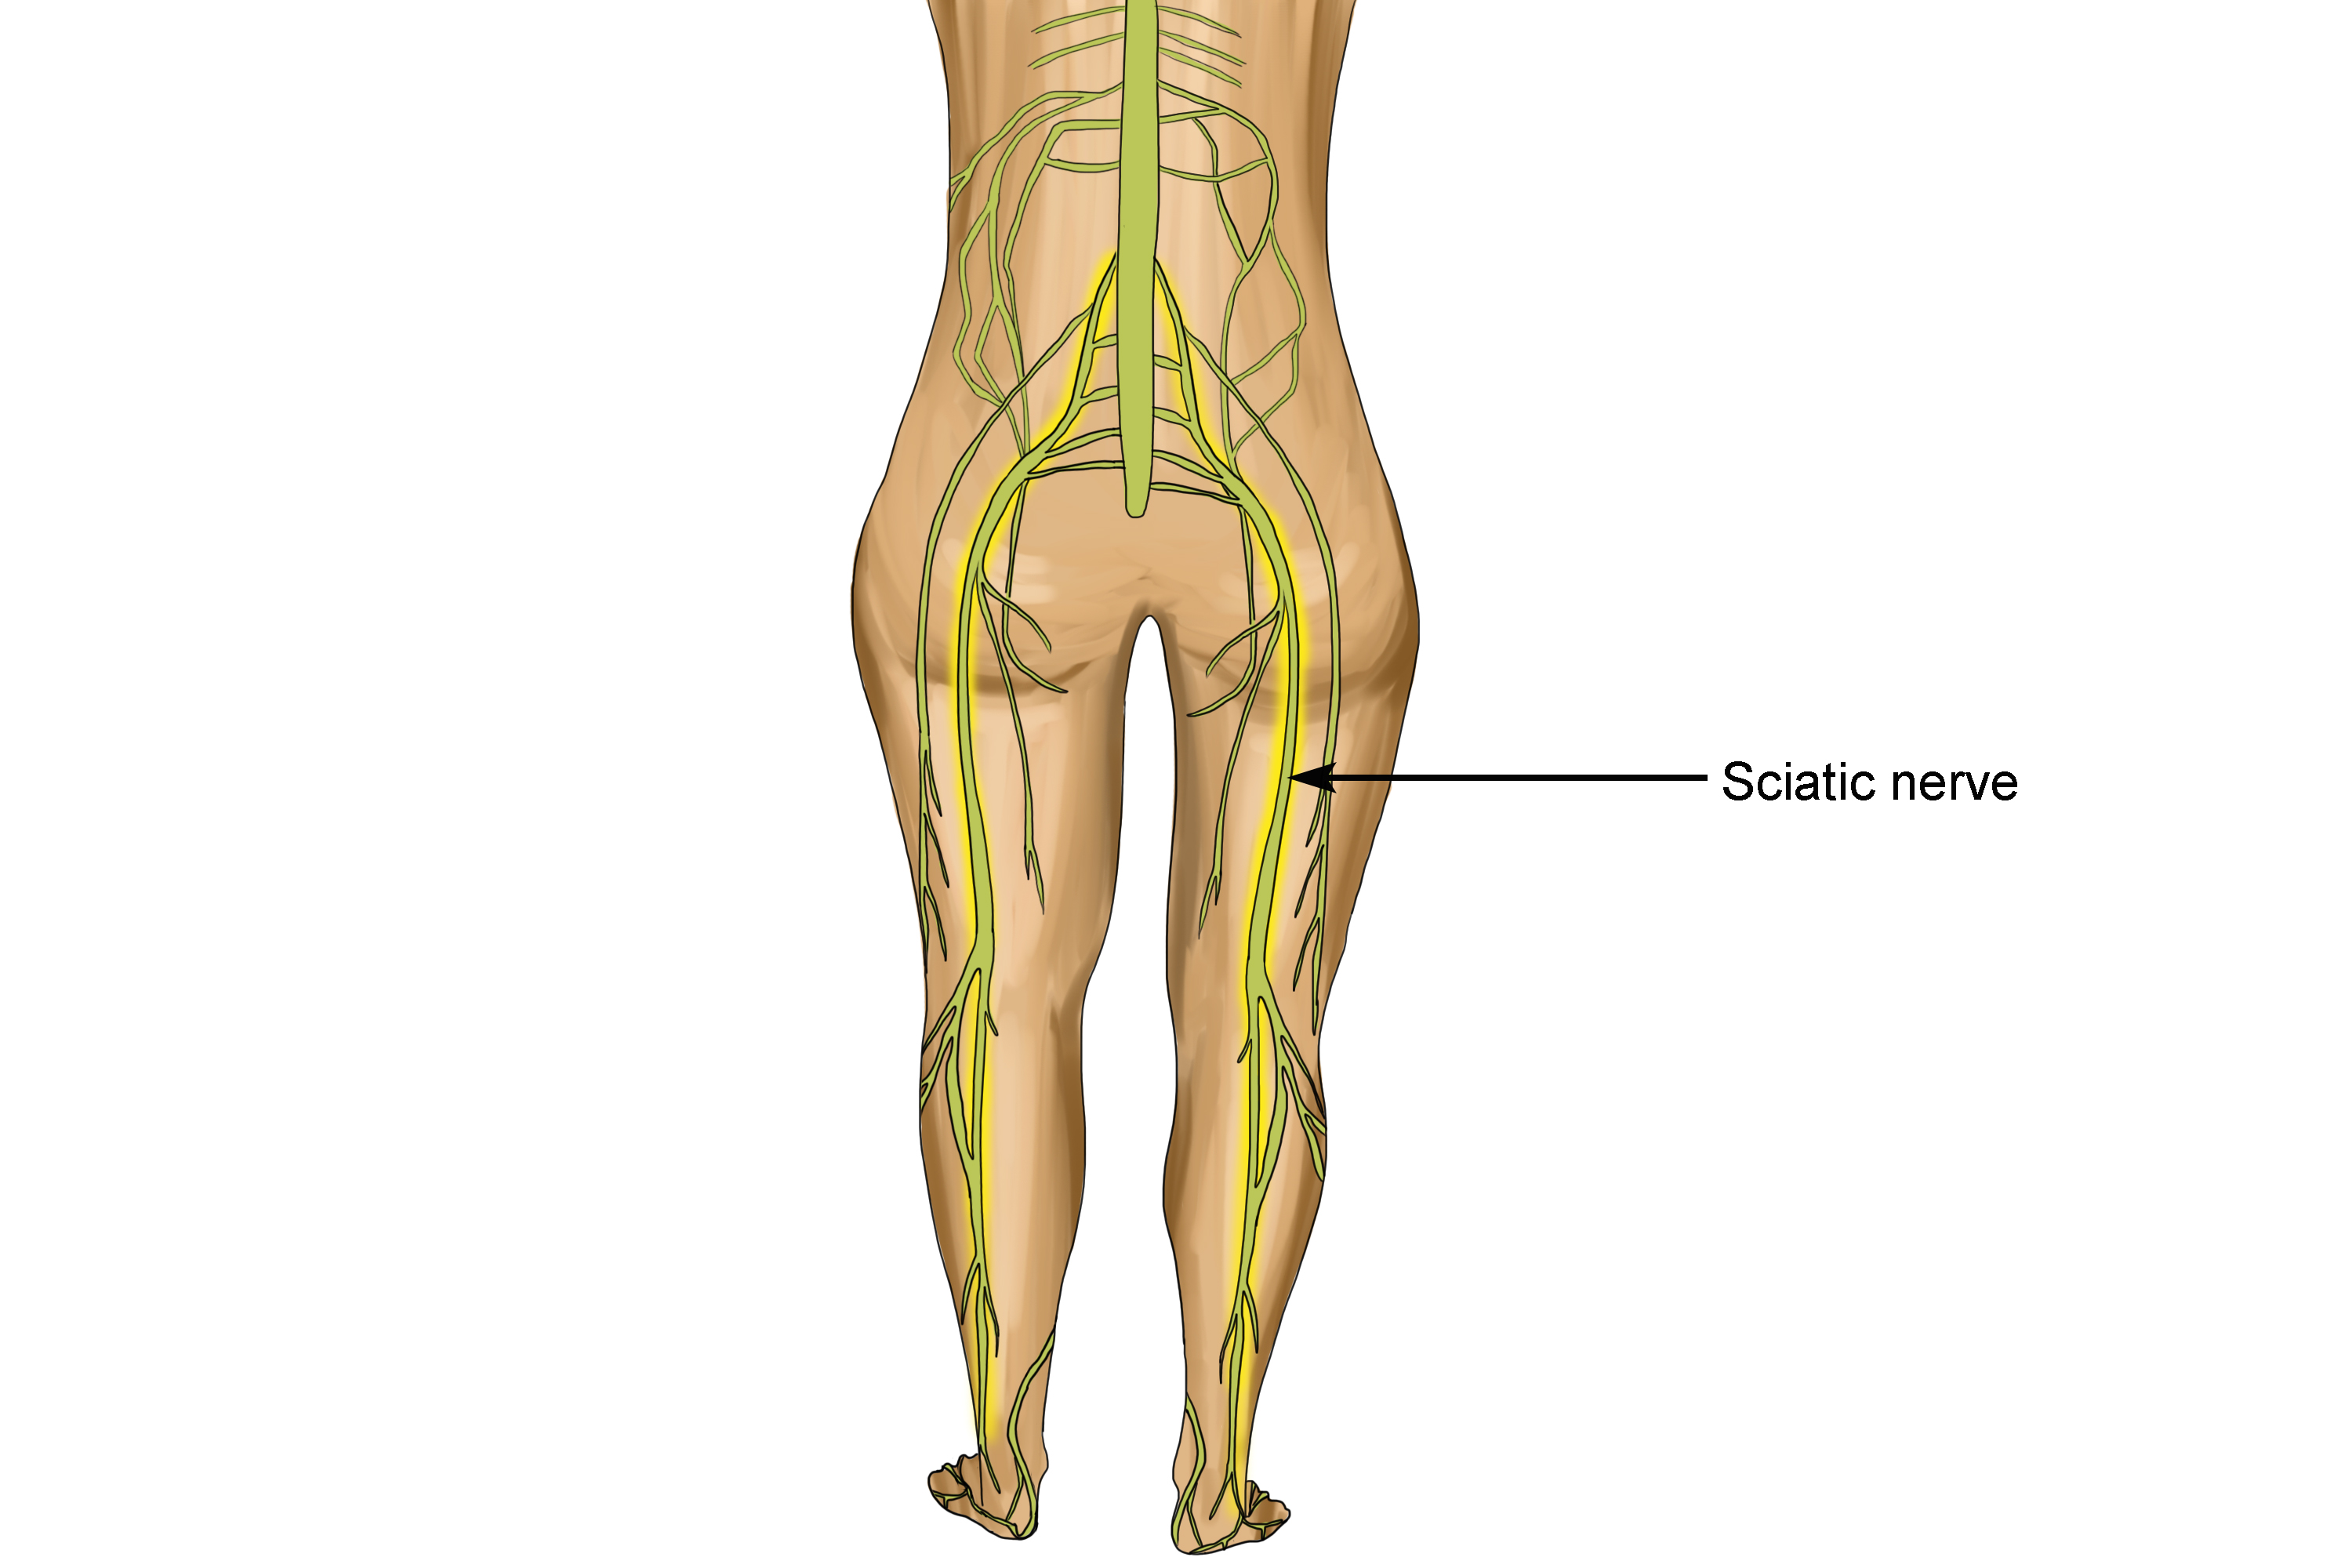 Image showing the sciatic nerve running down the leg to the toes